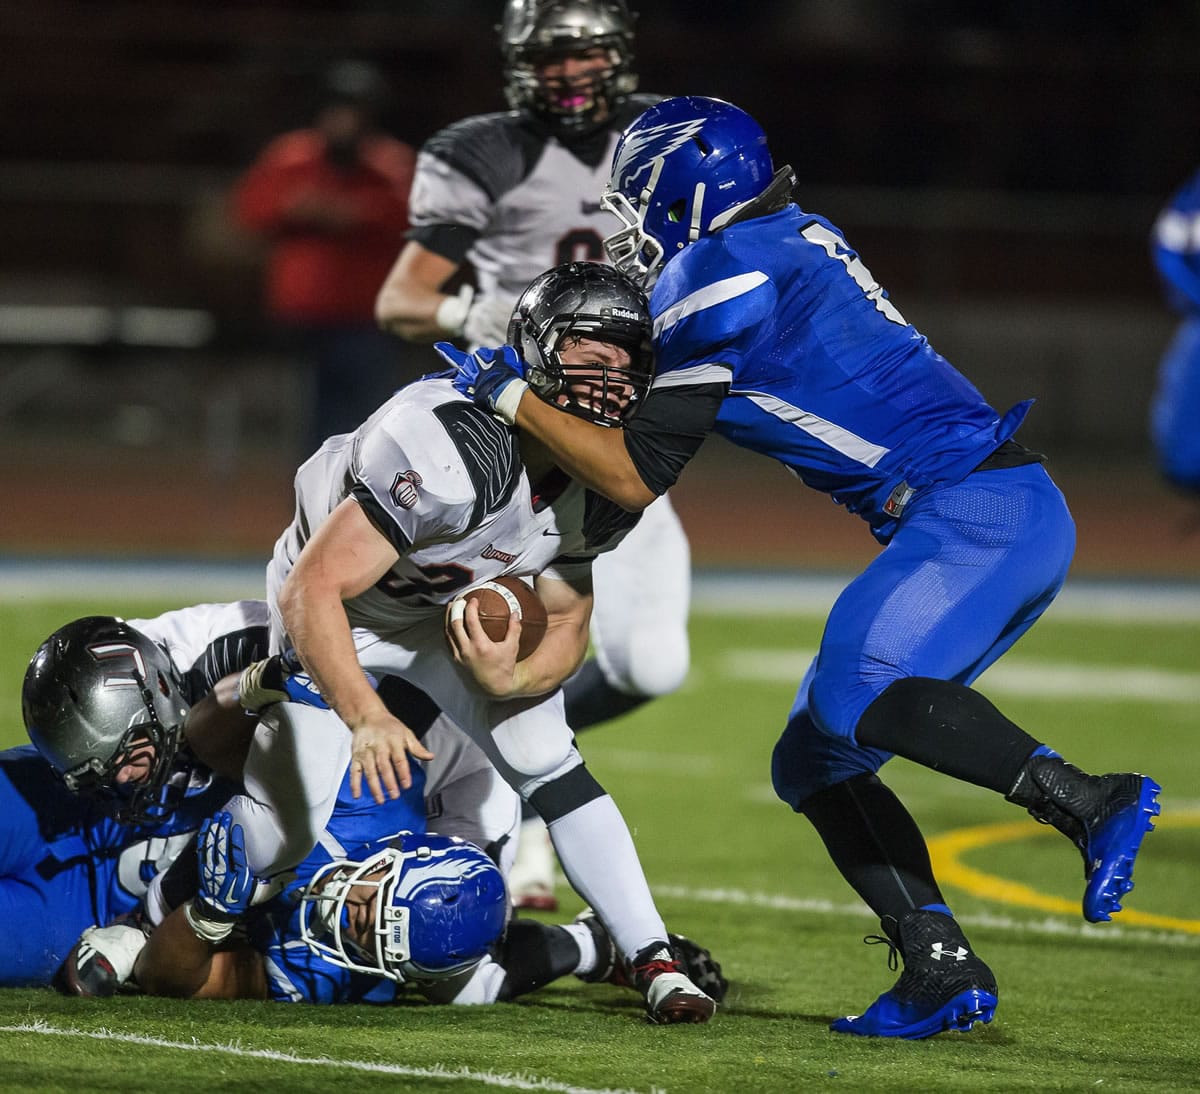 Union's Alex Berfanger earns a hard-fought two yards before being brought down by Federal Way's Andrzej Hughes-Murray